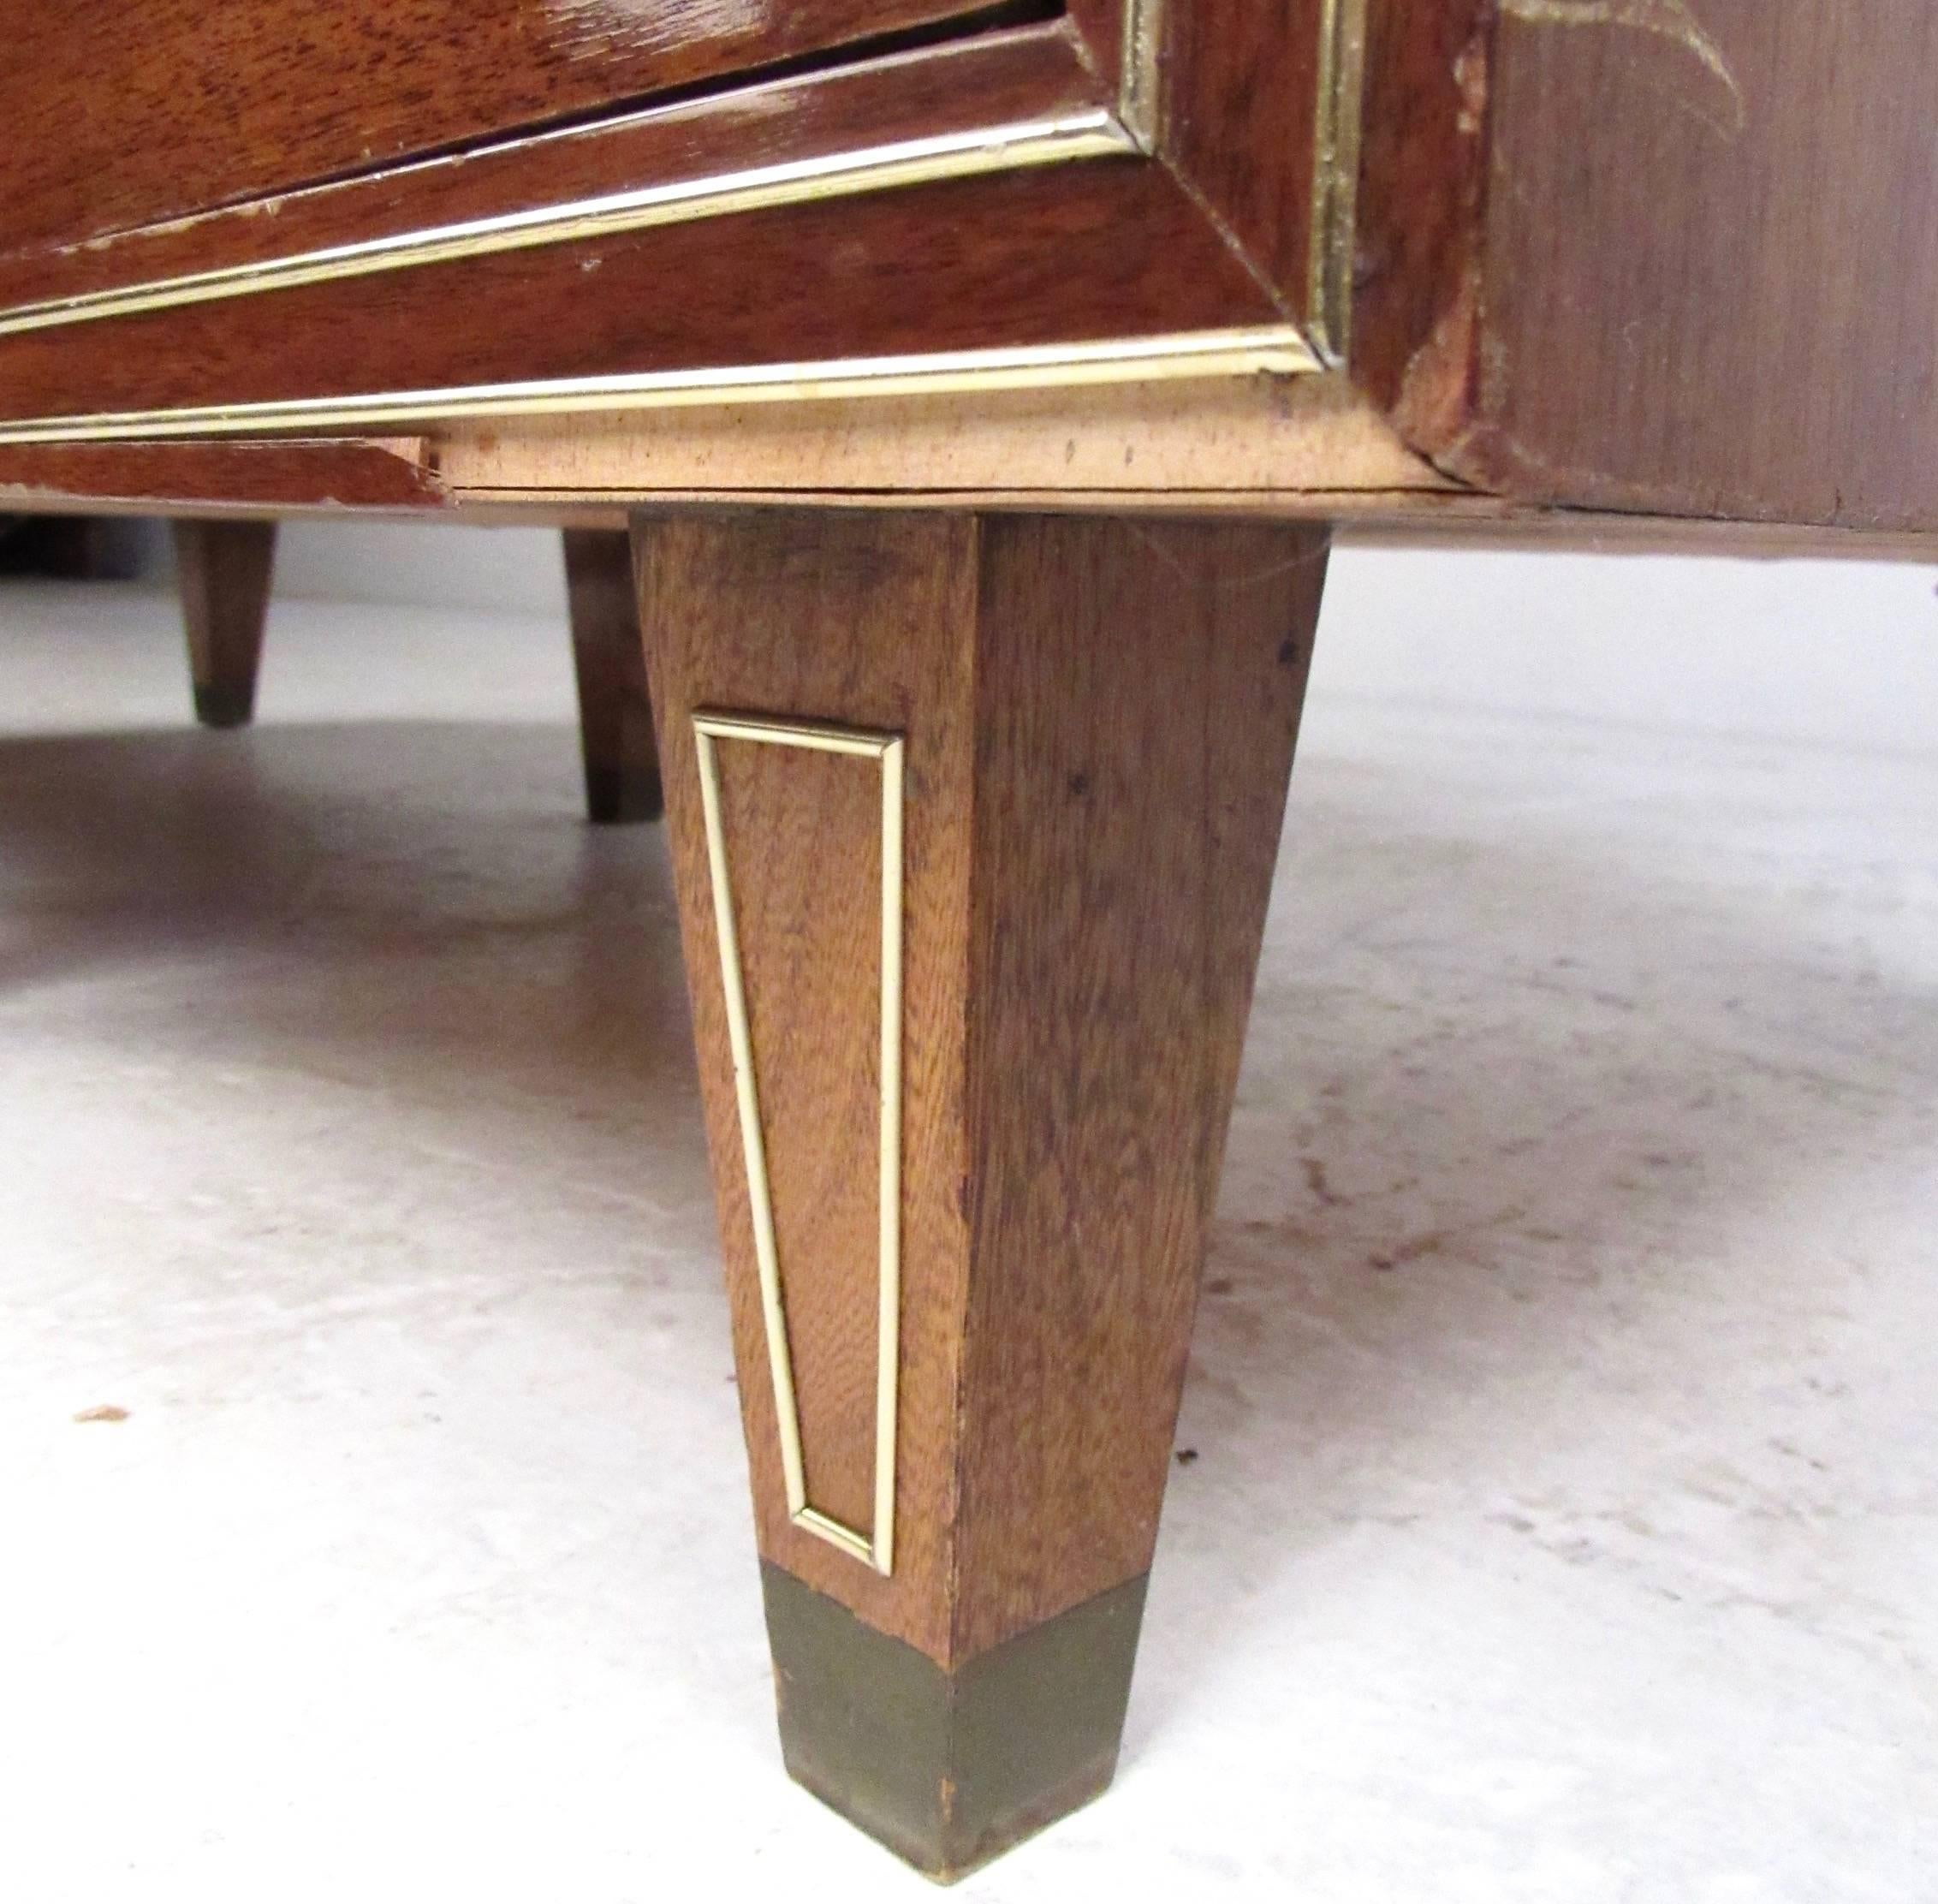 Inlay Pair of Vintage Walnut Nightstands by The Pennsylvania Furniture Co.